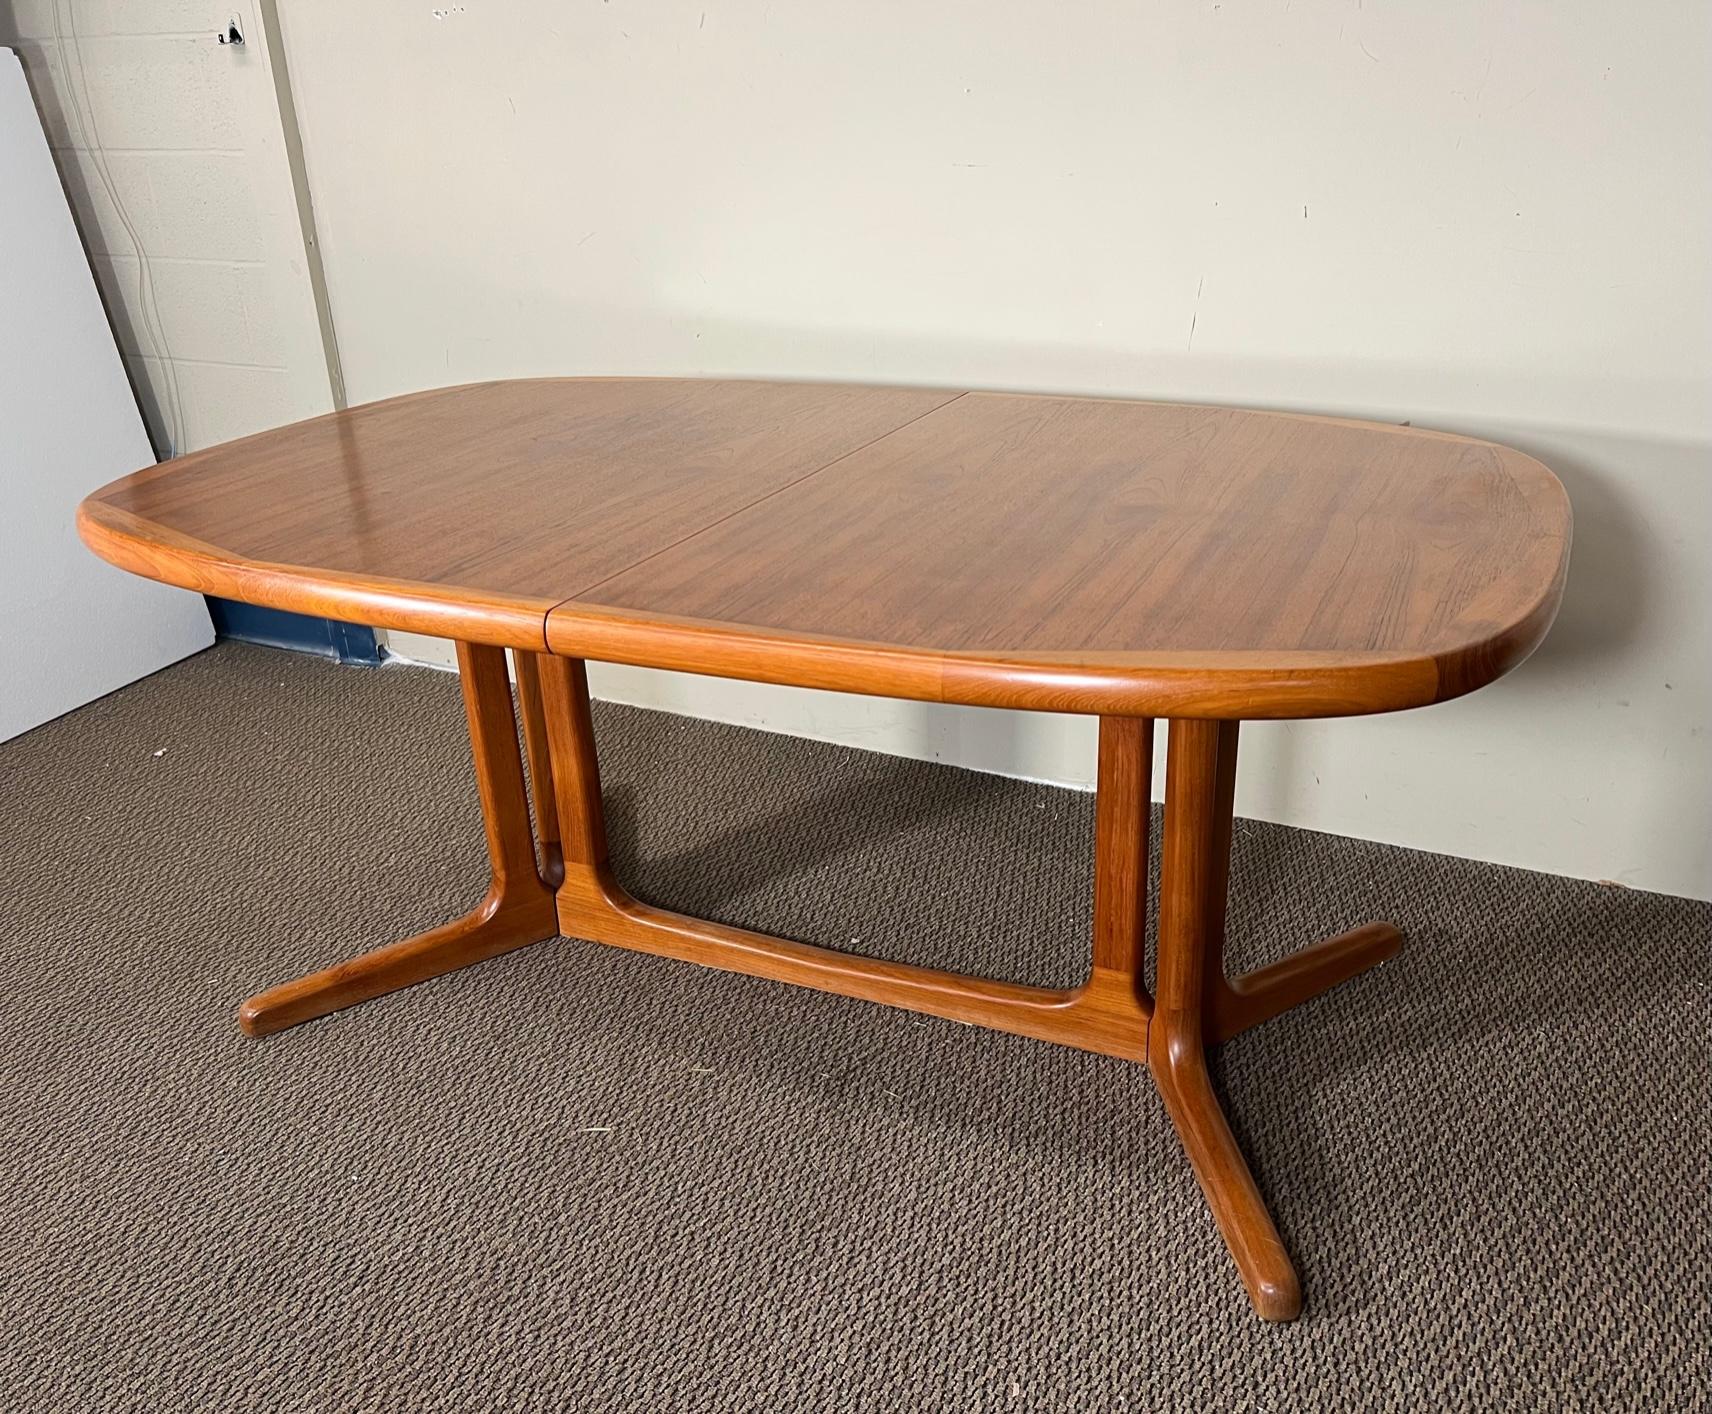 This is a Danish teak dining table with 2 extension leaves. Leaves can be stored inside the table when not in use. 
Very nice condition overall. Some loss of finish on the table top. Scratches on one leaf. The leaves are slightly darker than the